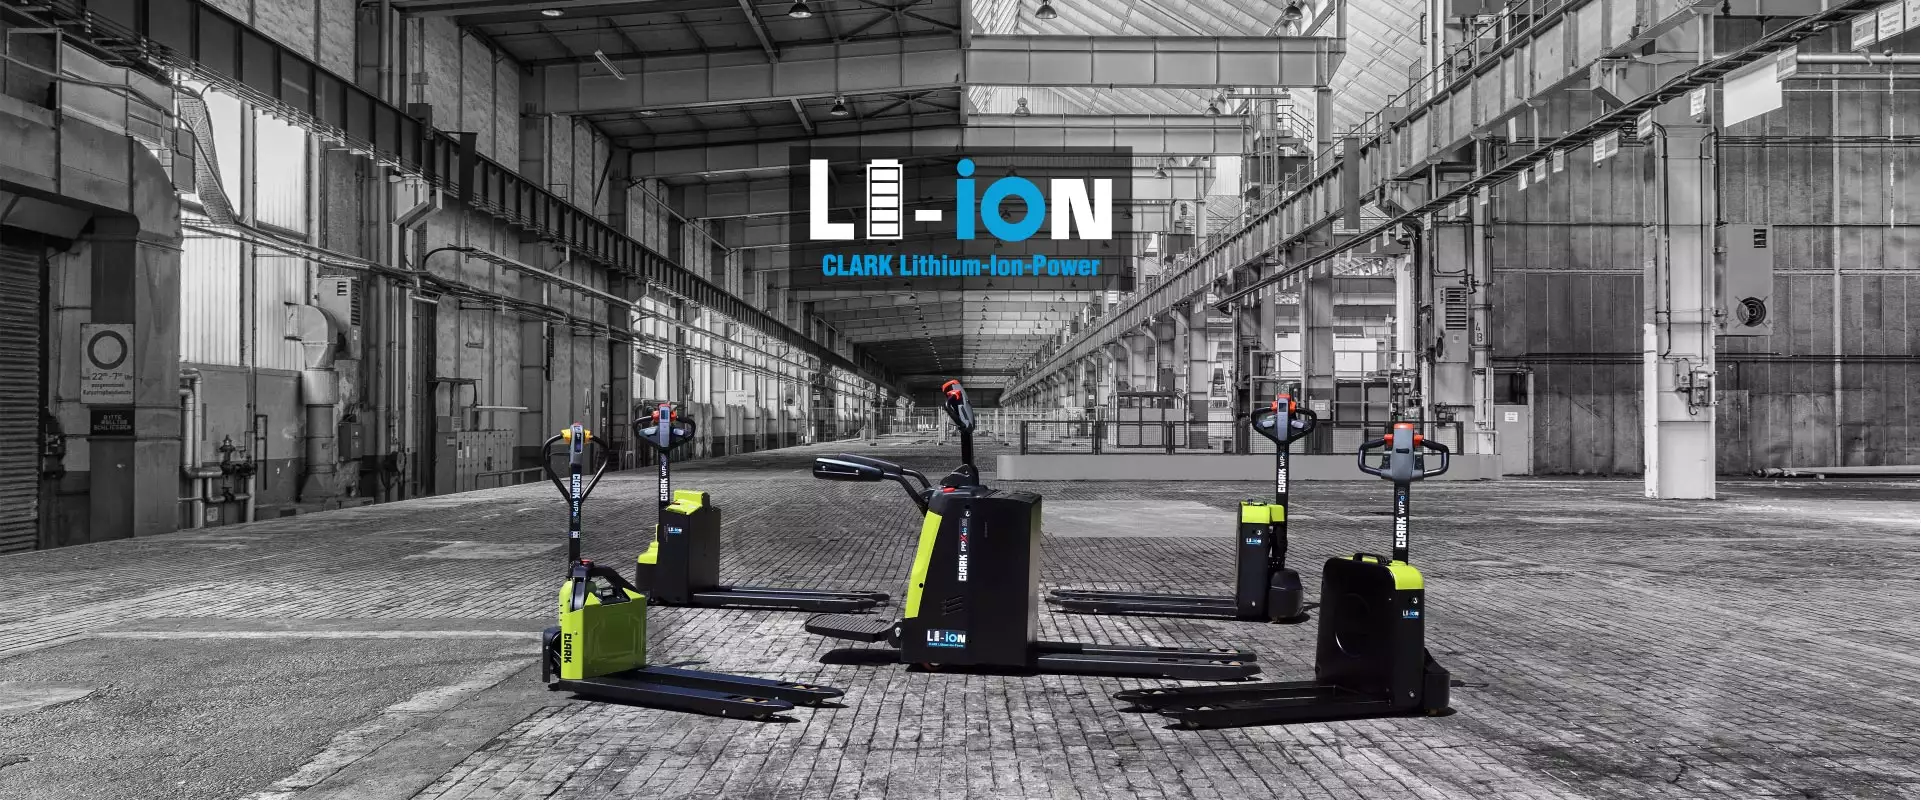 New electric low-lift pallet trucks with Lithium-Ion technology